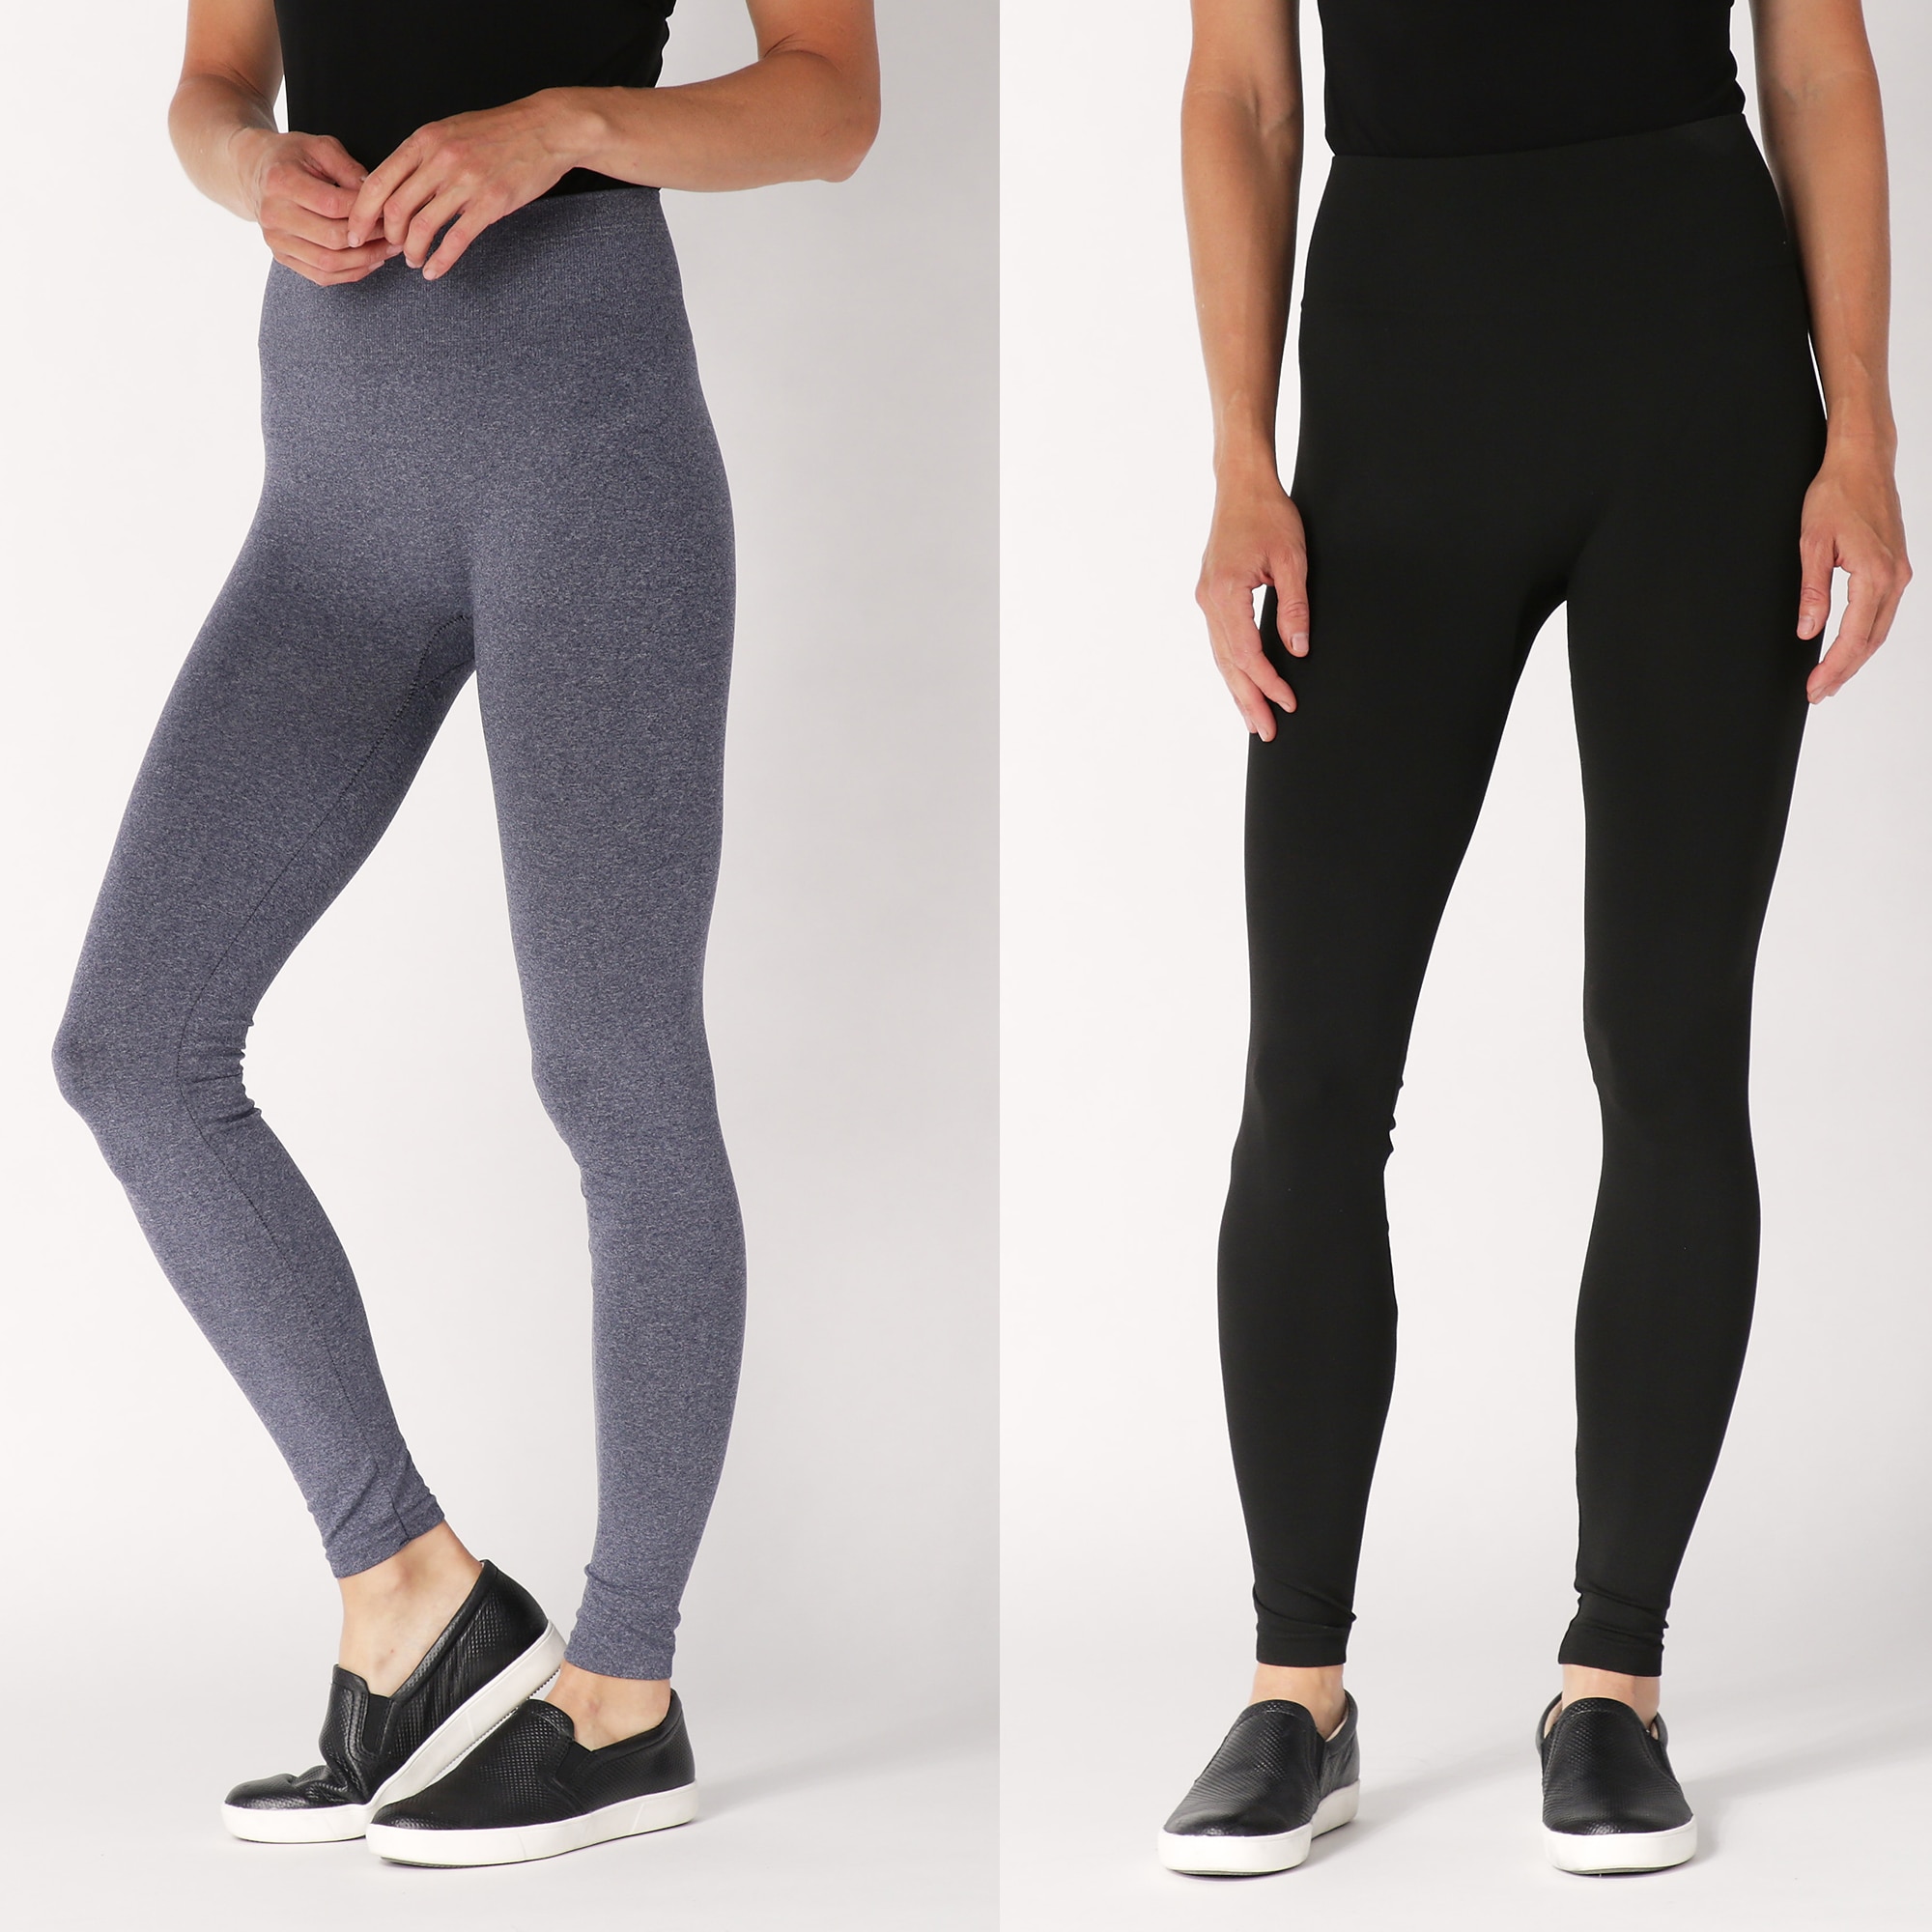 2 Leggings for $24 | I'm so excited to be working with a brand that is such  great quality & caters to strong women of all shapes and sizes. | By  Victoria JusticeFacebook